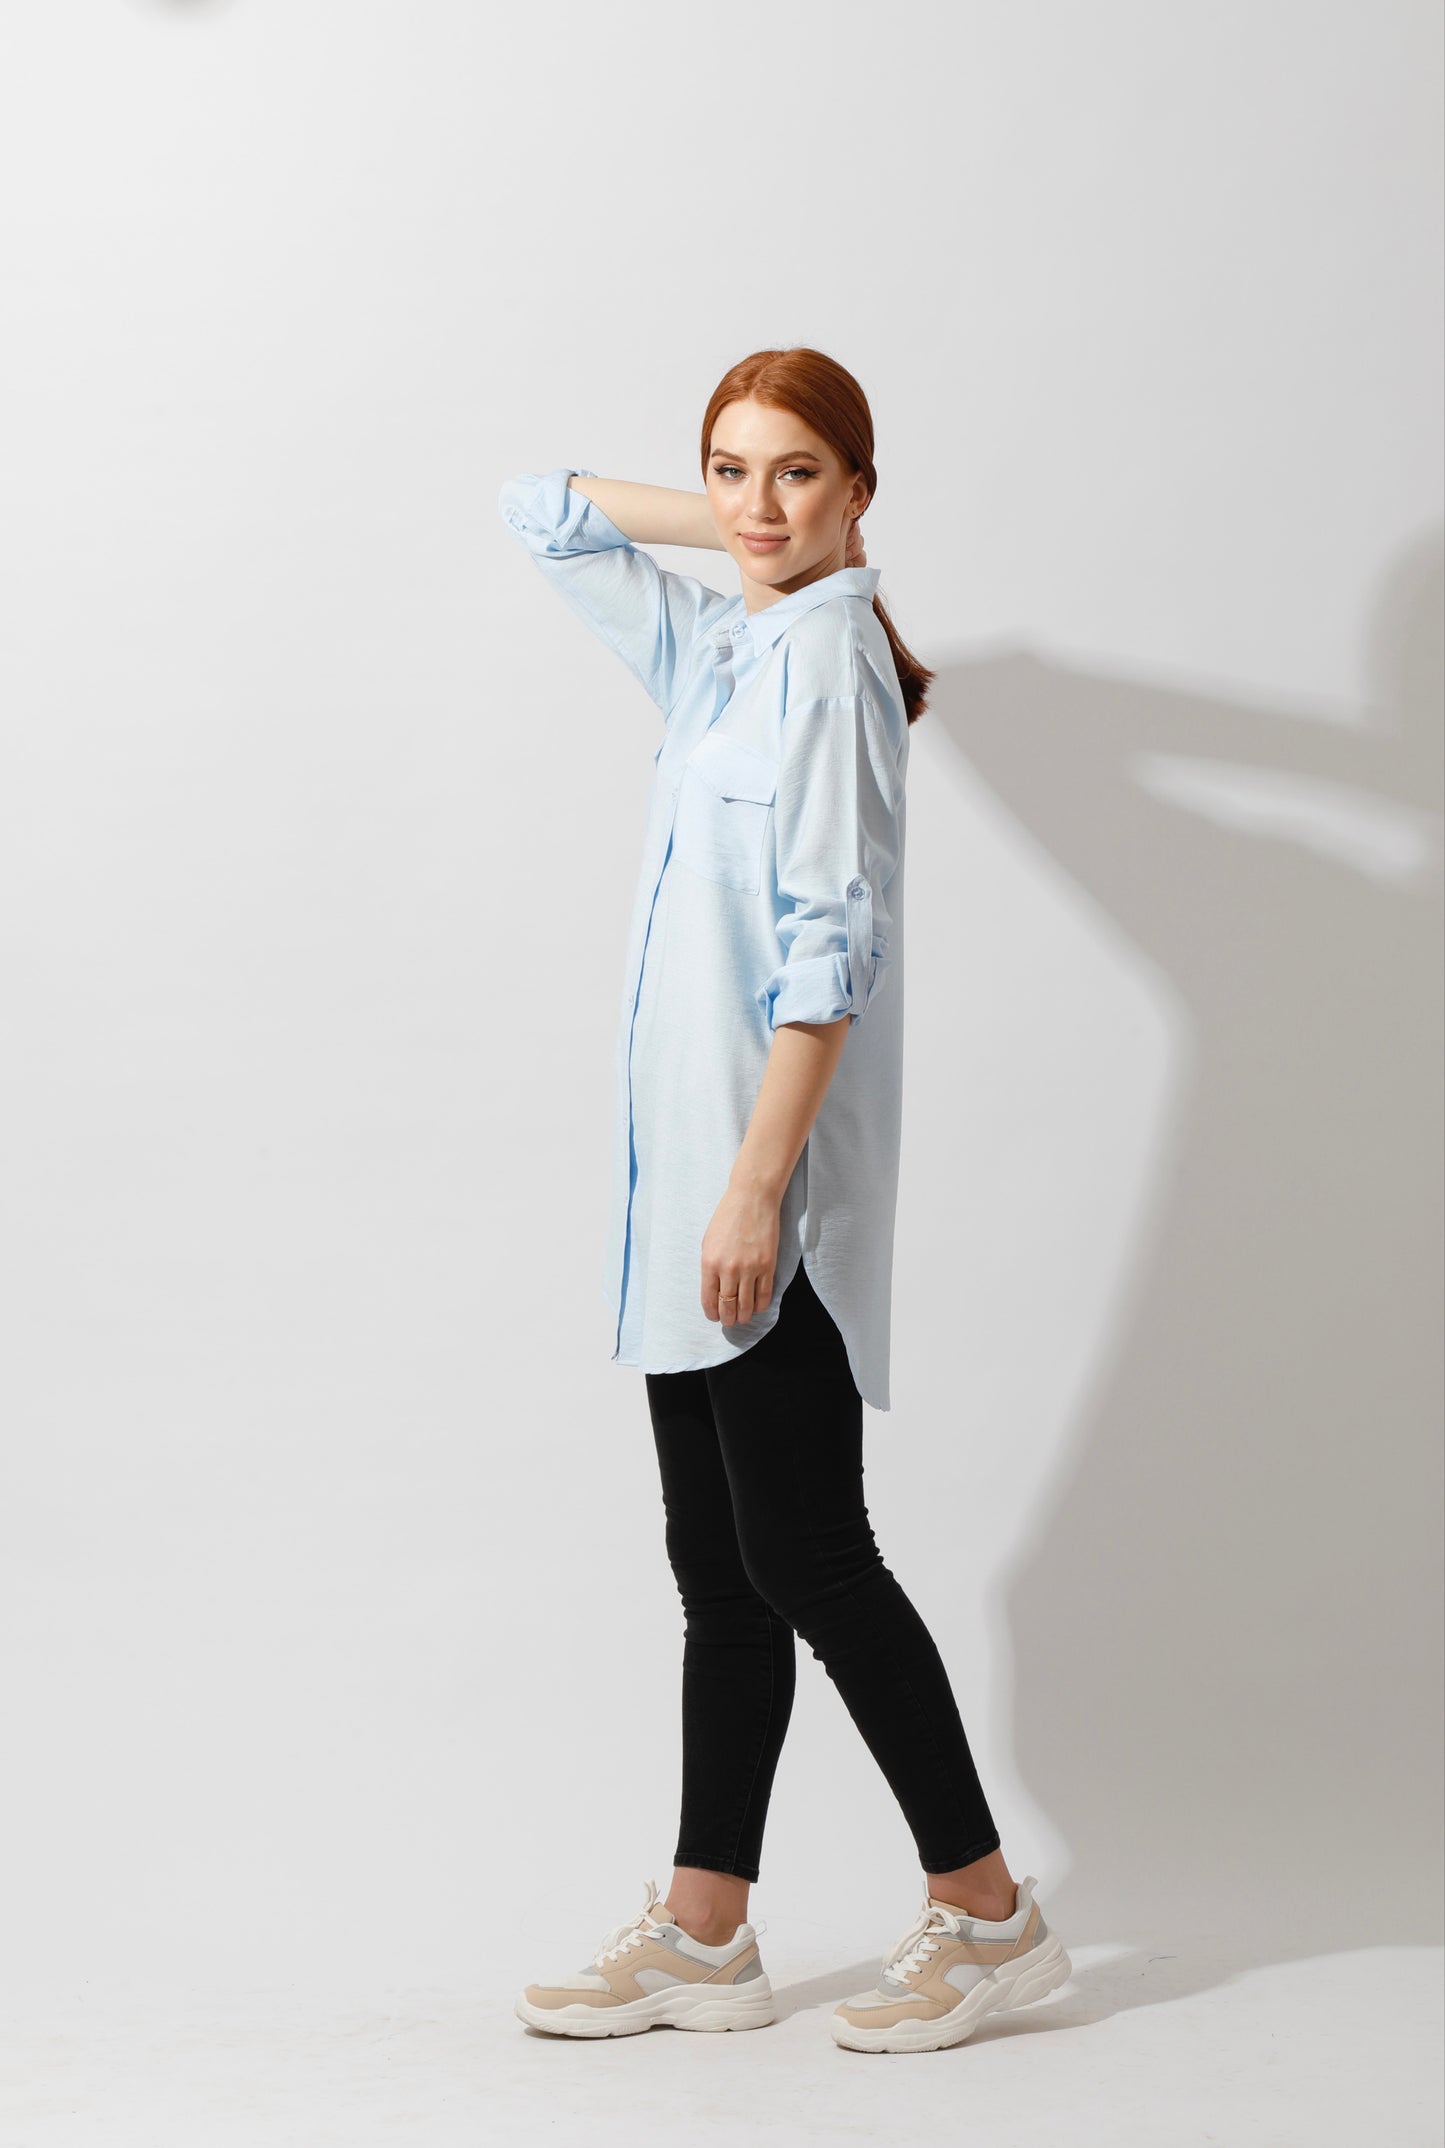 Linen Women's Blouse with Long Sleeves and Two Pockets - EMY & ROSE Boutique